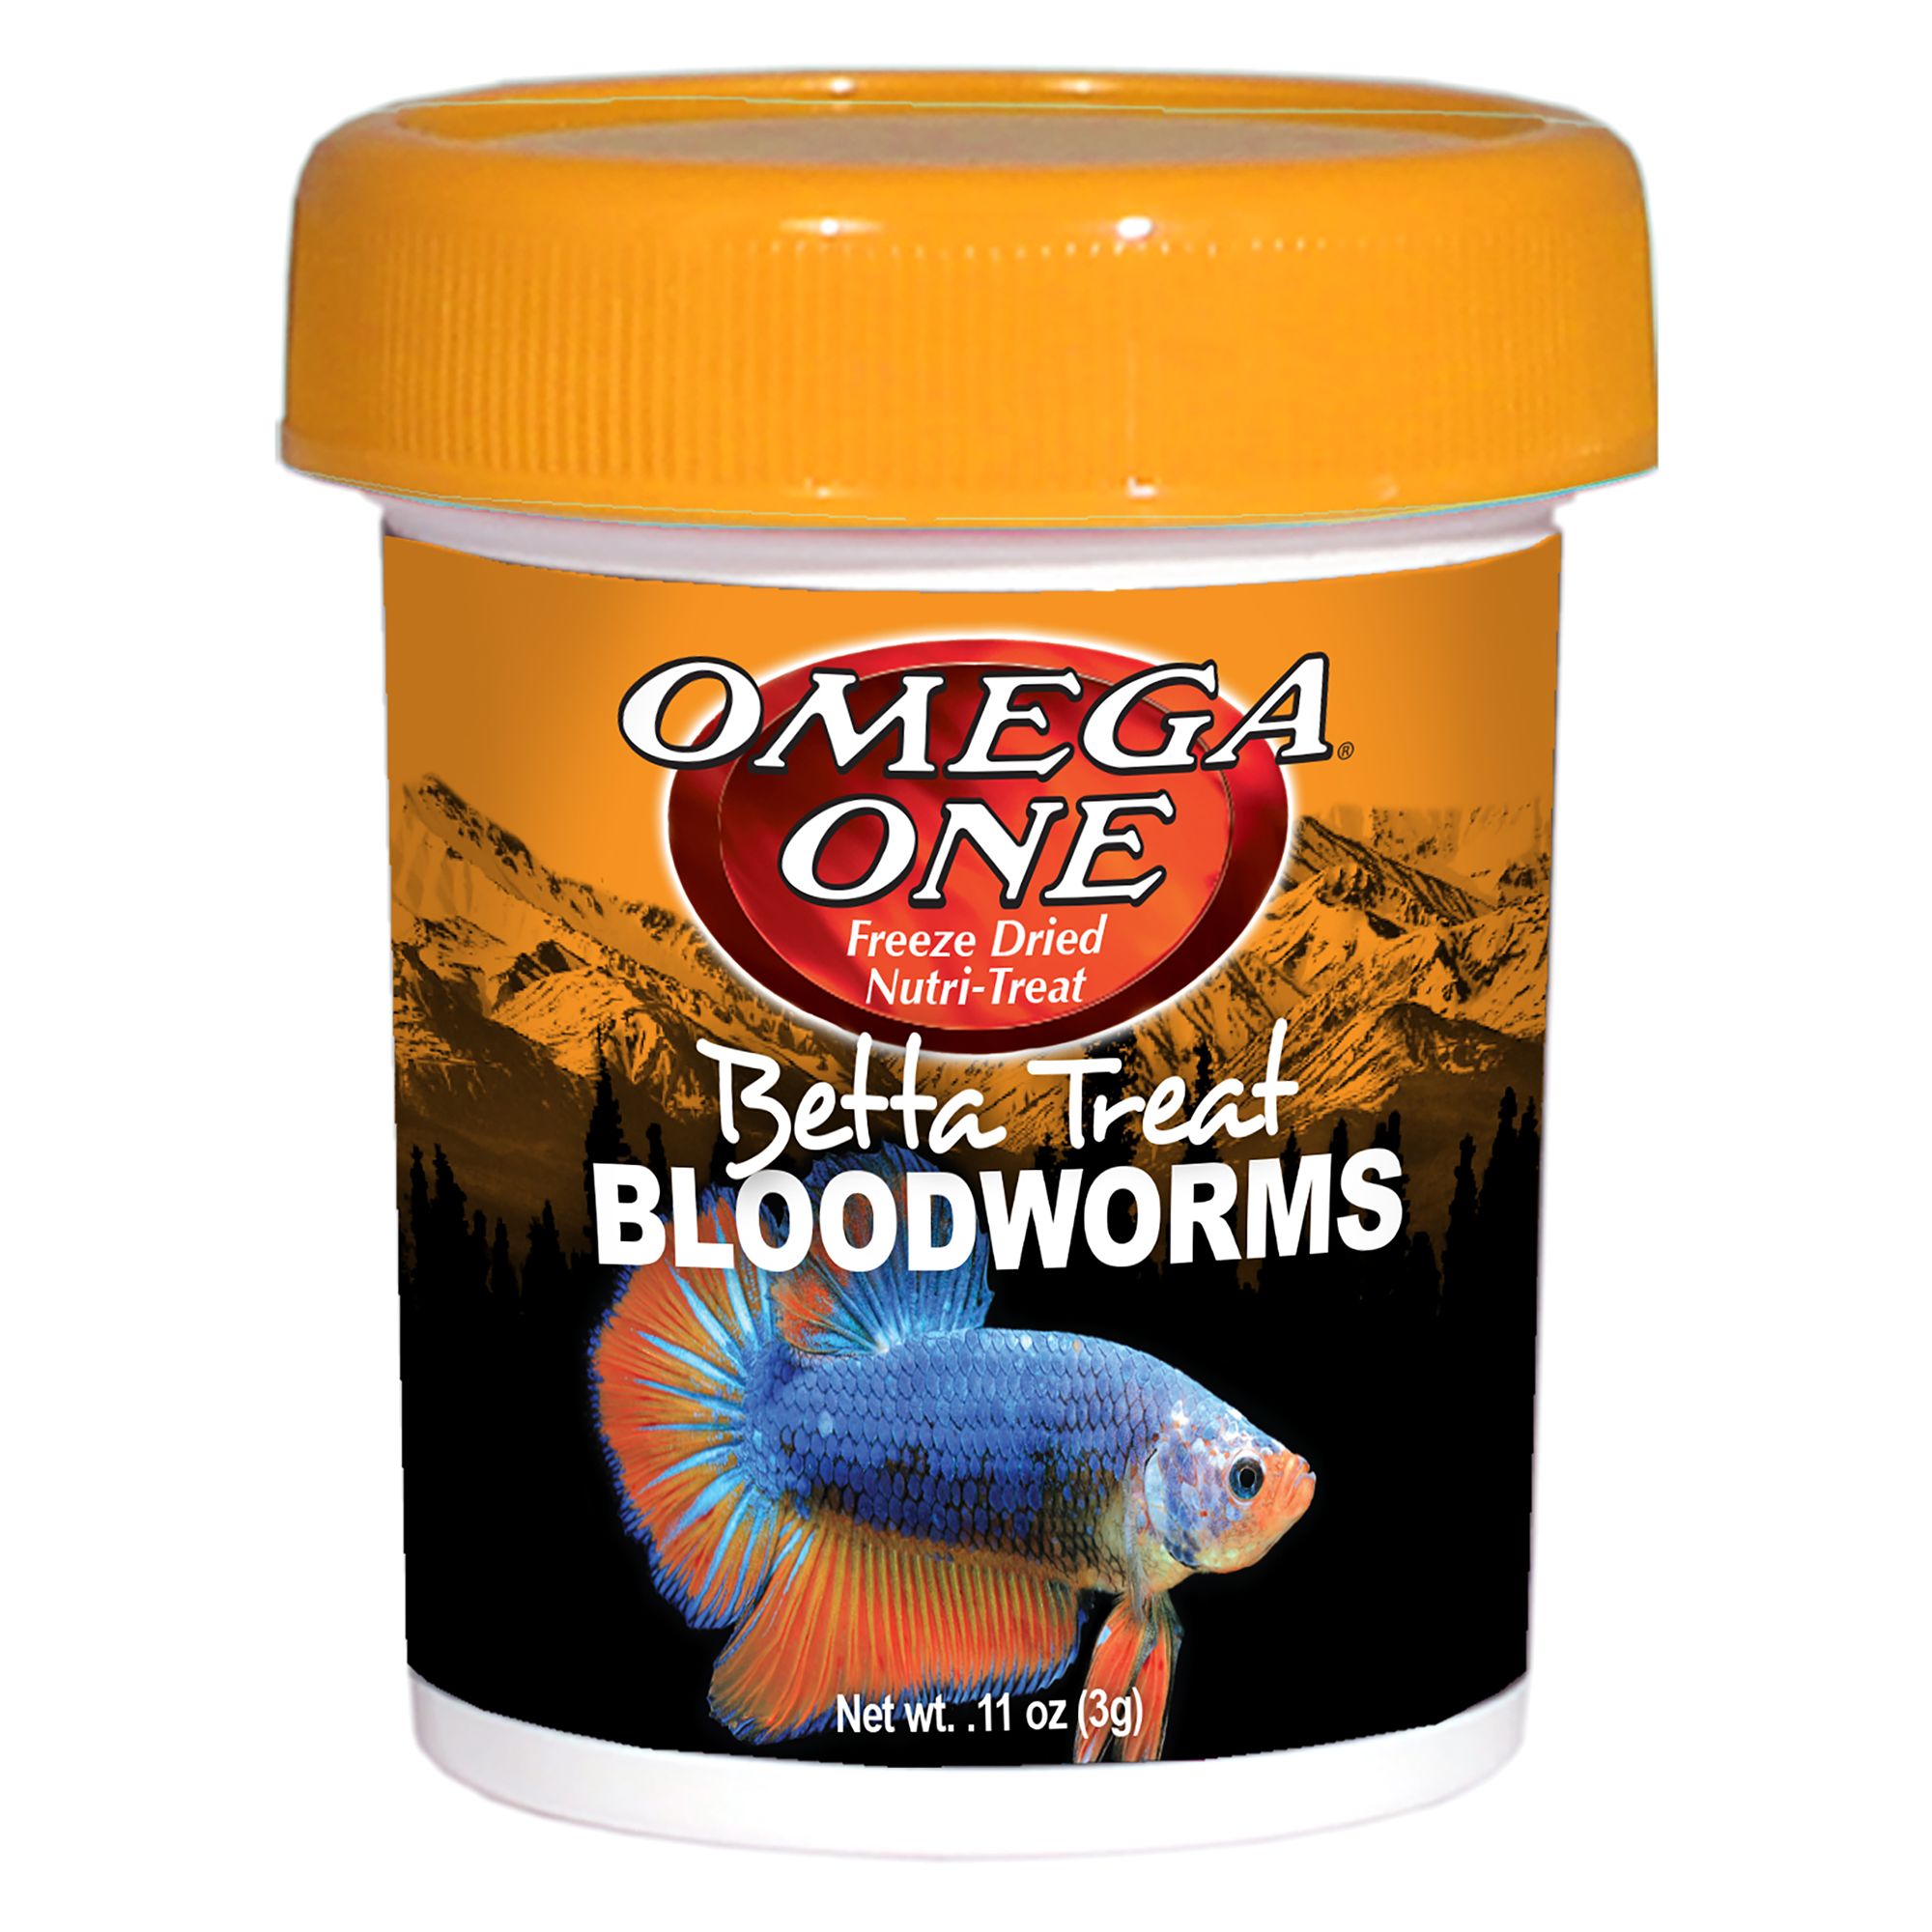 Omega™ One Freeze Dried Bloodworms Fish Treat, fish Food